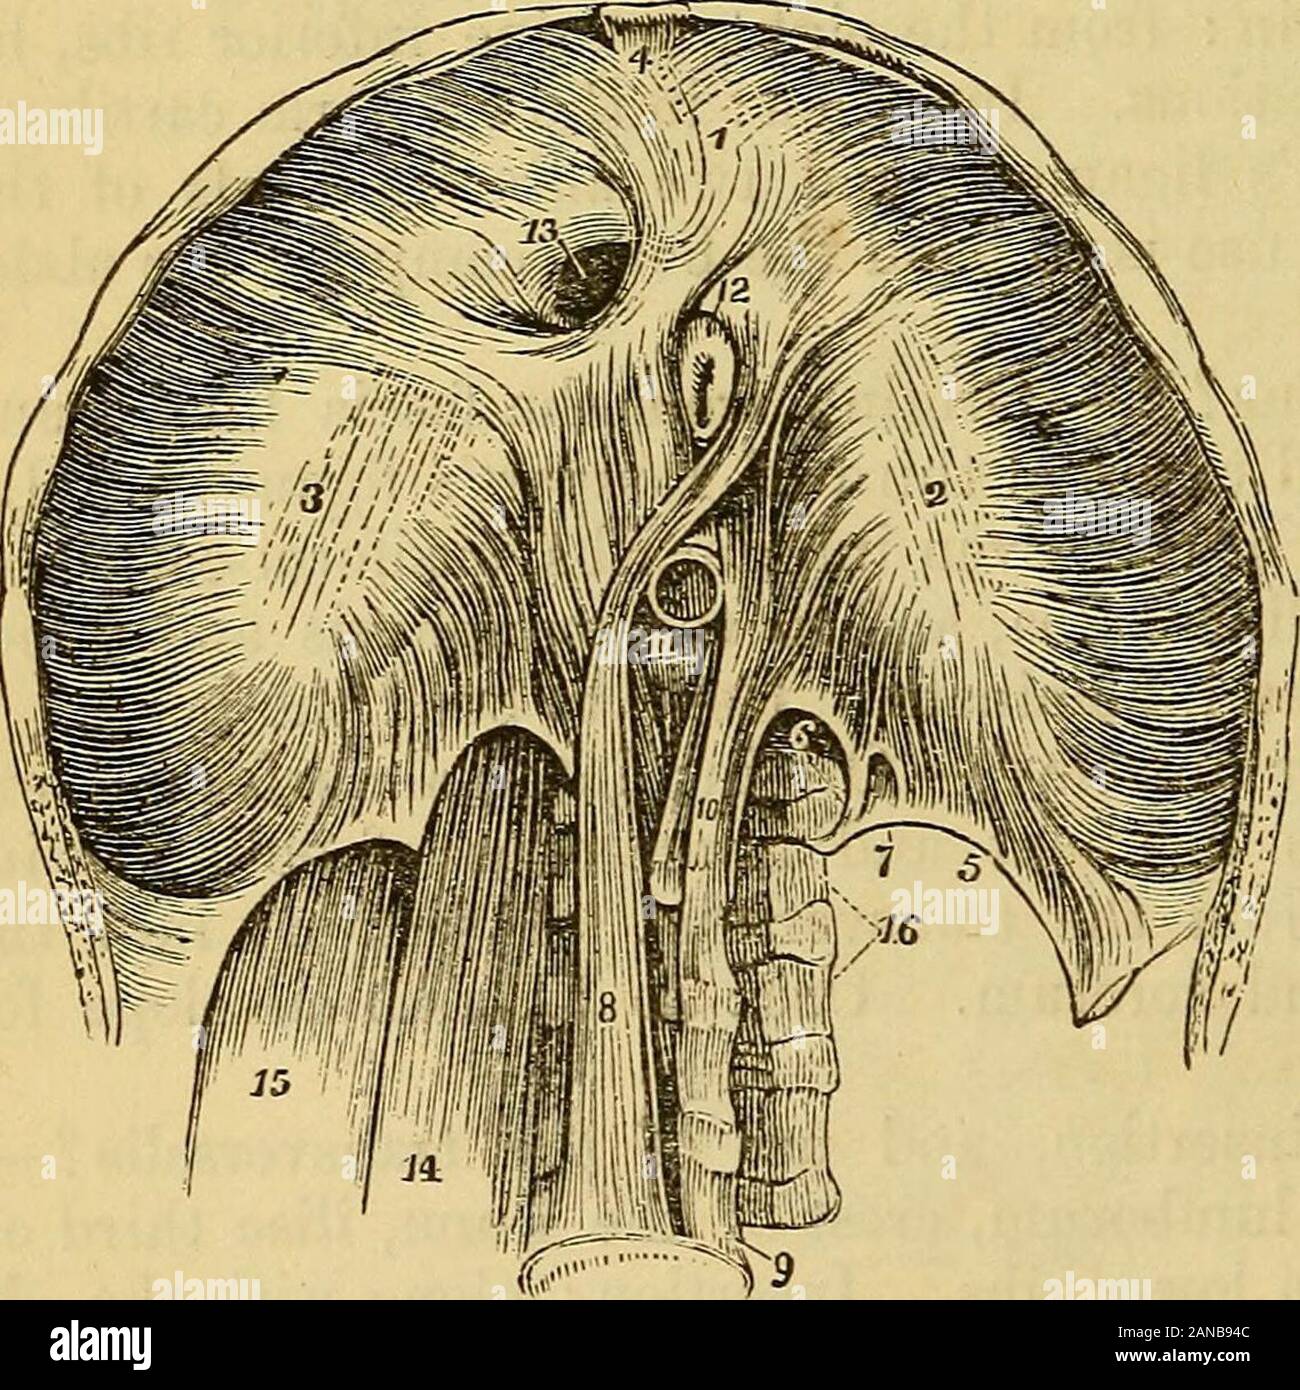 A manual of examinations : upon anatomy, physiology, surgery, practice of medicine, chemistry, obstetrics, materia medica, pharmacy and therapeutics, especially designed for students of medicine, to which is added a medical formulary . r surface of the xiphoid cartilage, internal surface of cartilages ofFig. 62. last true and all the false ribs, from external liga mentum arcuatum,^ andfrom the convex edge ofthe true ligament. In-sertion : cordiform ten-don. Of the lesser muscleof the diaphragm ? ° —?Origin: right crus, fromthe fore part of thebodies of the four firstlumbar vertebrae. In-sertio Stock Photo